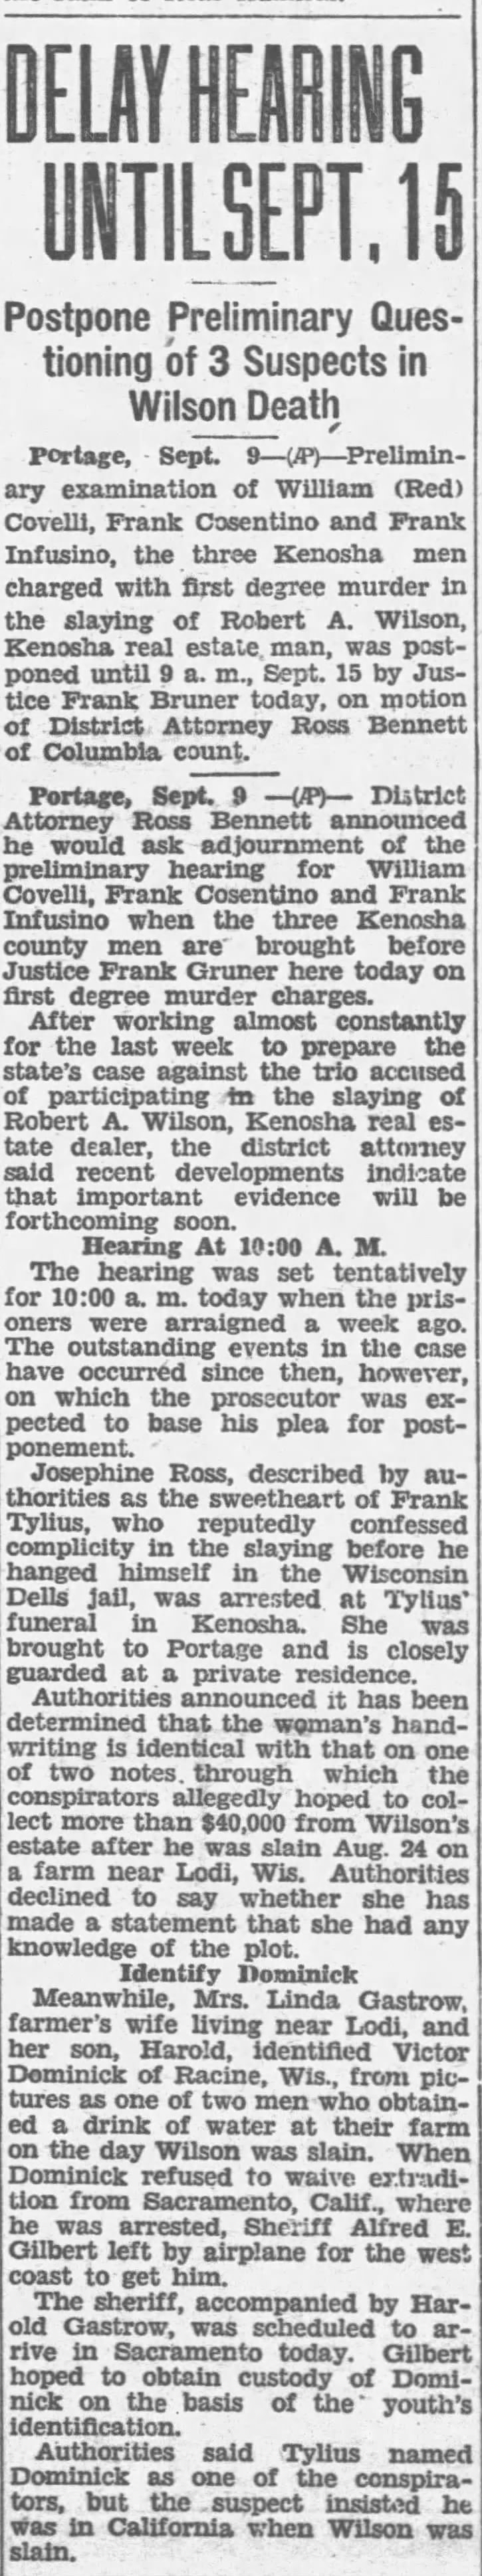 Frank Cosentino  and two others Sep 9 1932 Marshfield News